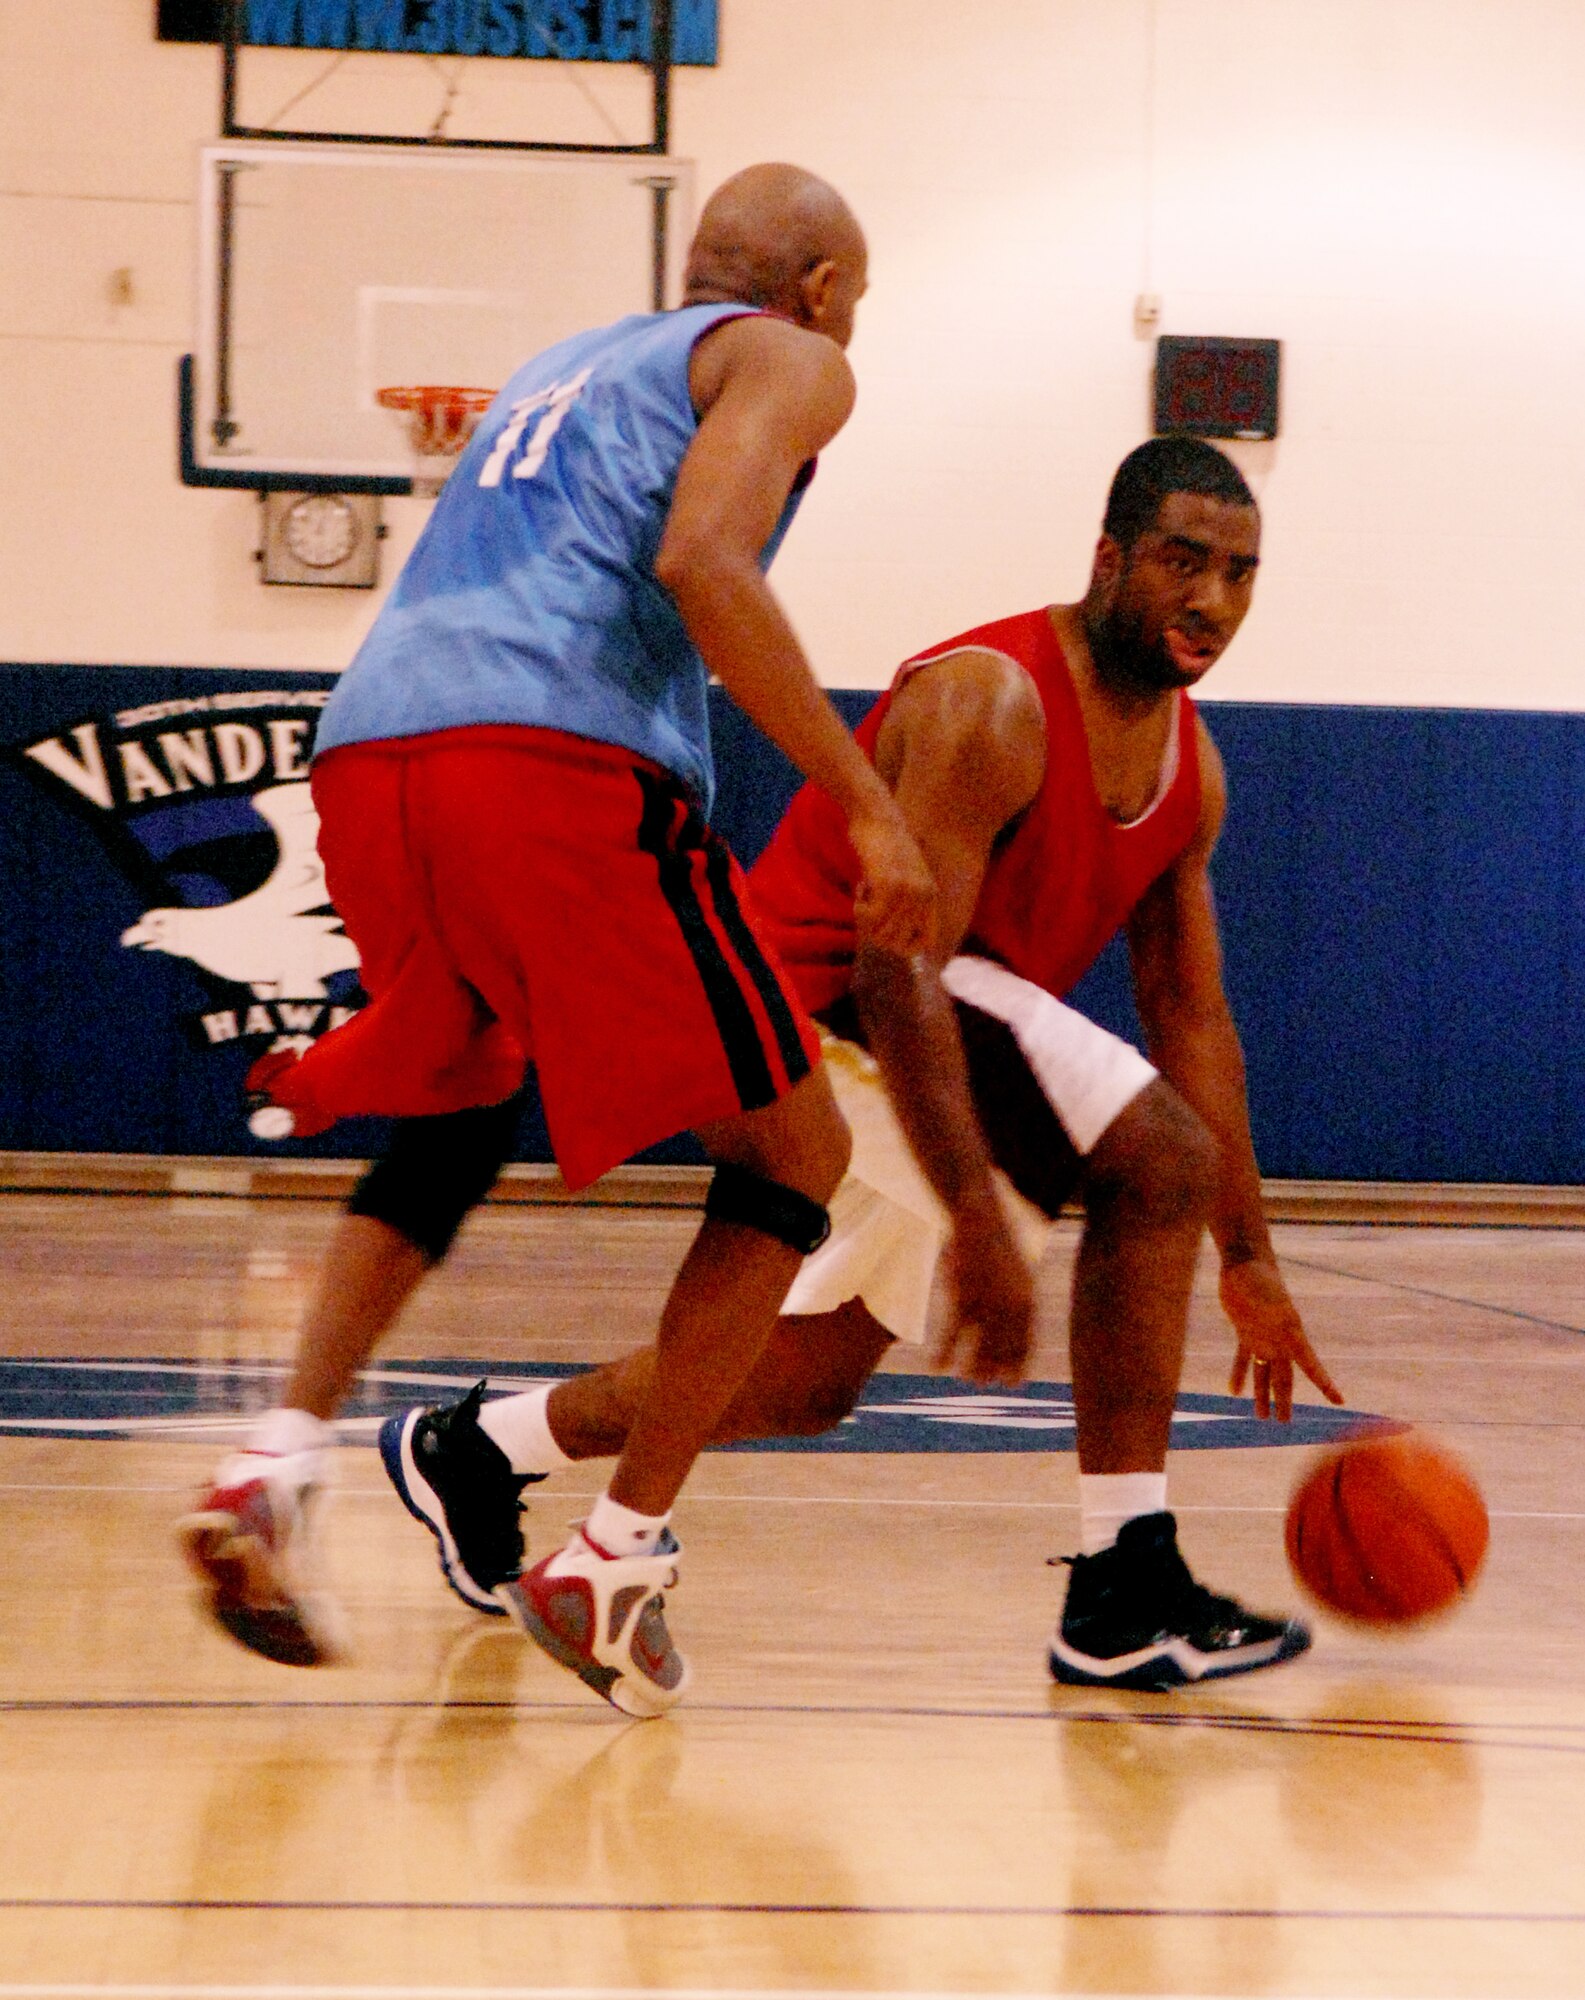 VANDENBERG AIR FORCE BASE, Calif. -- Fred McCree, 30th Medical Operations Squadron, passes by his defender, Marlin Edwards, JFCC Space, during an intramural basketball game at the base gym recently. (U. S. Air Force photo / Airman 1st Class Antoinette Lyons)